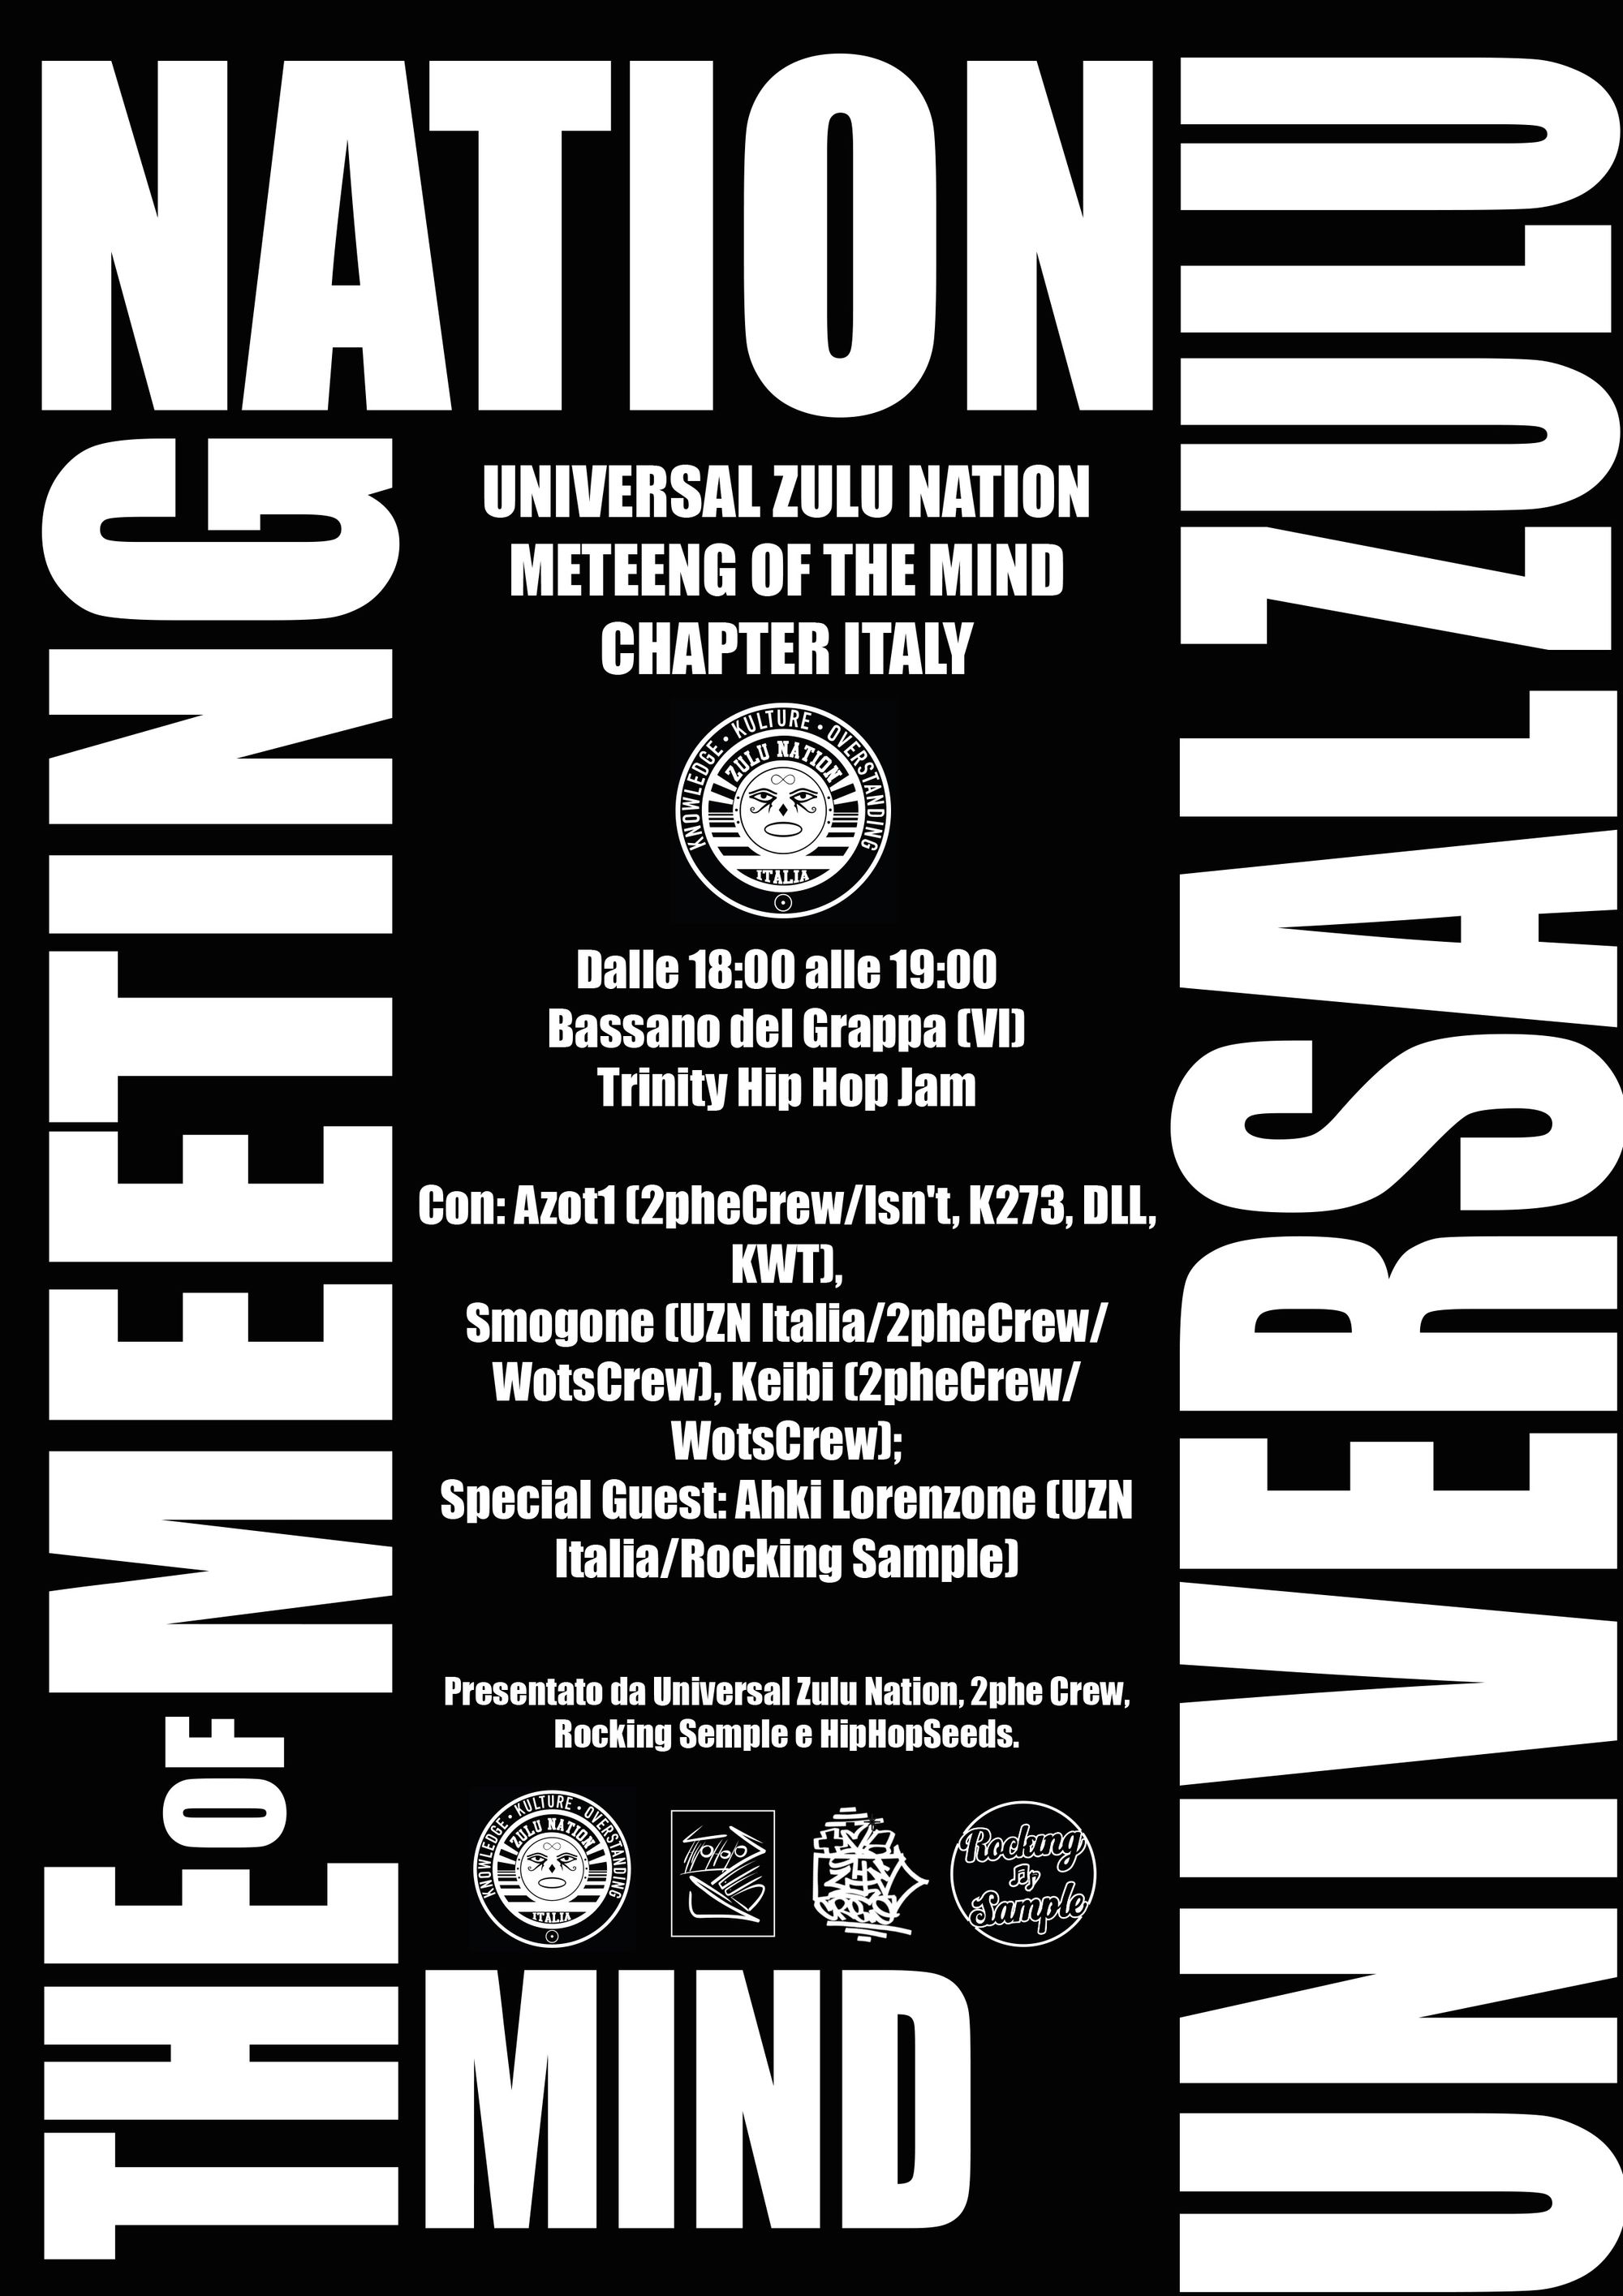 Trinity Hip Hop Jam + Universal Zulu Nation Meeting of the Mind -17 Settembre- Bassano del Grappa